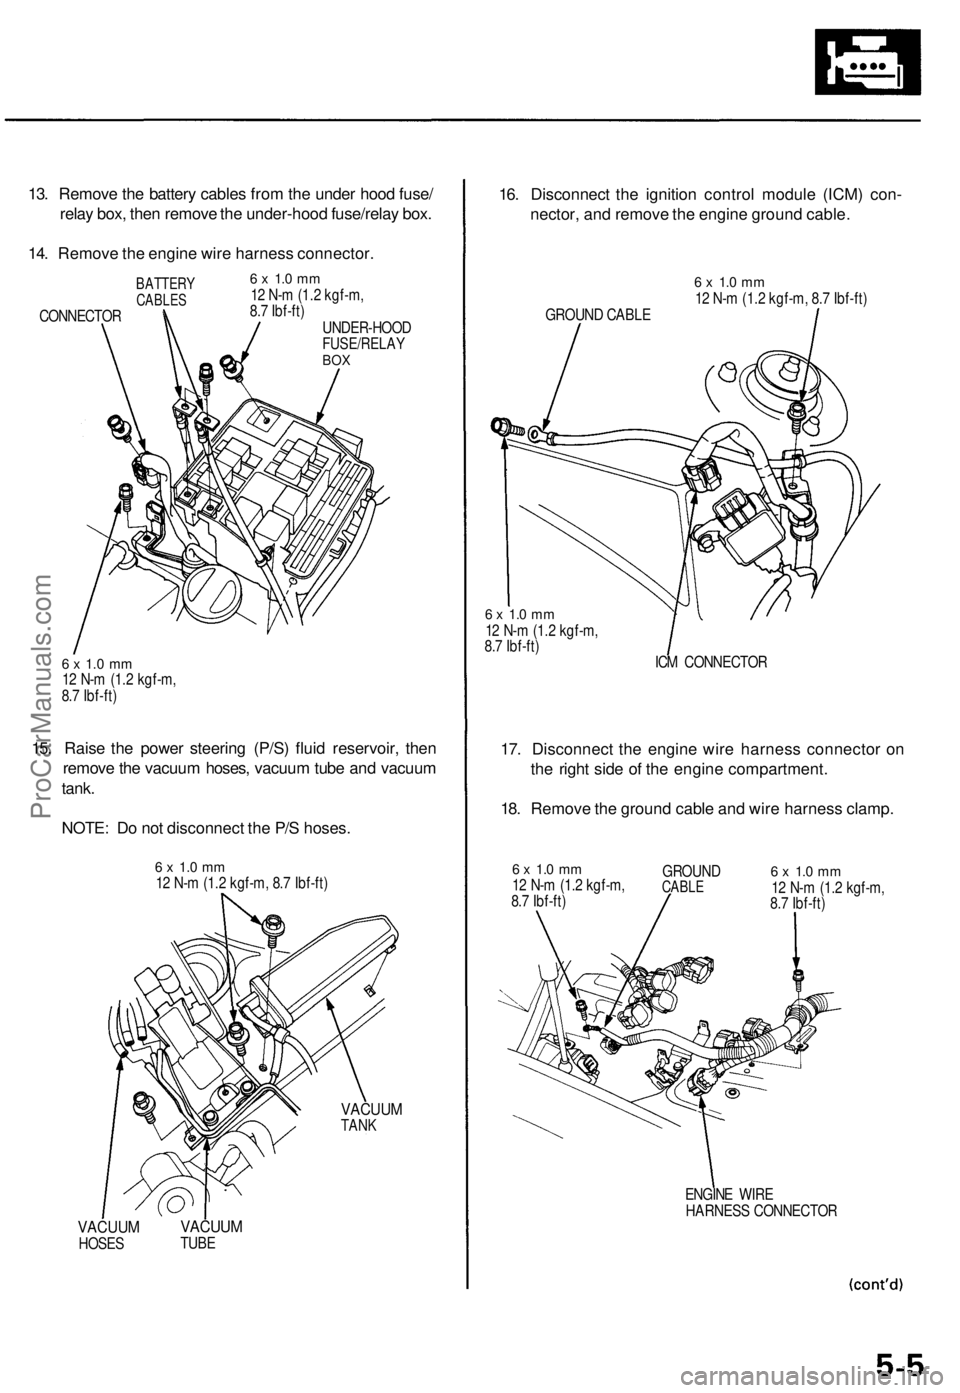 ACURA TL 1995  Service Repair Manual 
13. Remove the battery cables from the under hood fuse/

relay box, then remove the under-hood fuse/relay box.

14. Remove the engine wire harness connector.

BATTERY

CABLES

CONNECTOR 
6 x 1.0 mm

